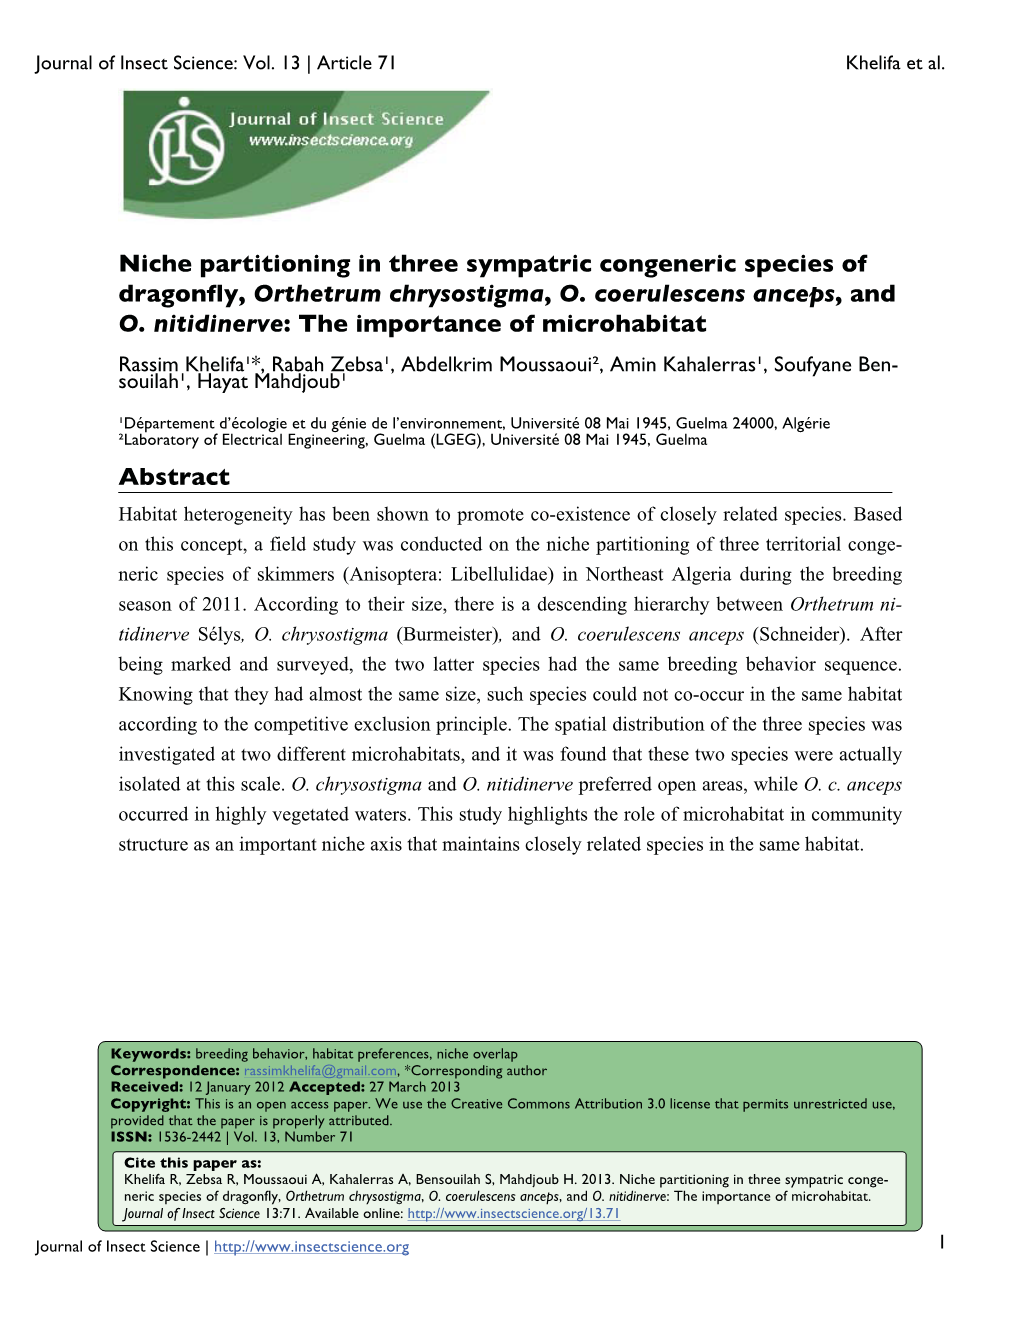 Niche Partitioning in Three Sympatric Congeneric Species of Dragonfly, Orthetrum Chrysostigma, O